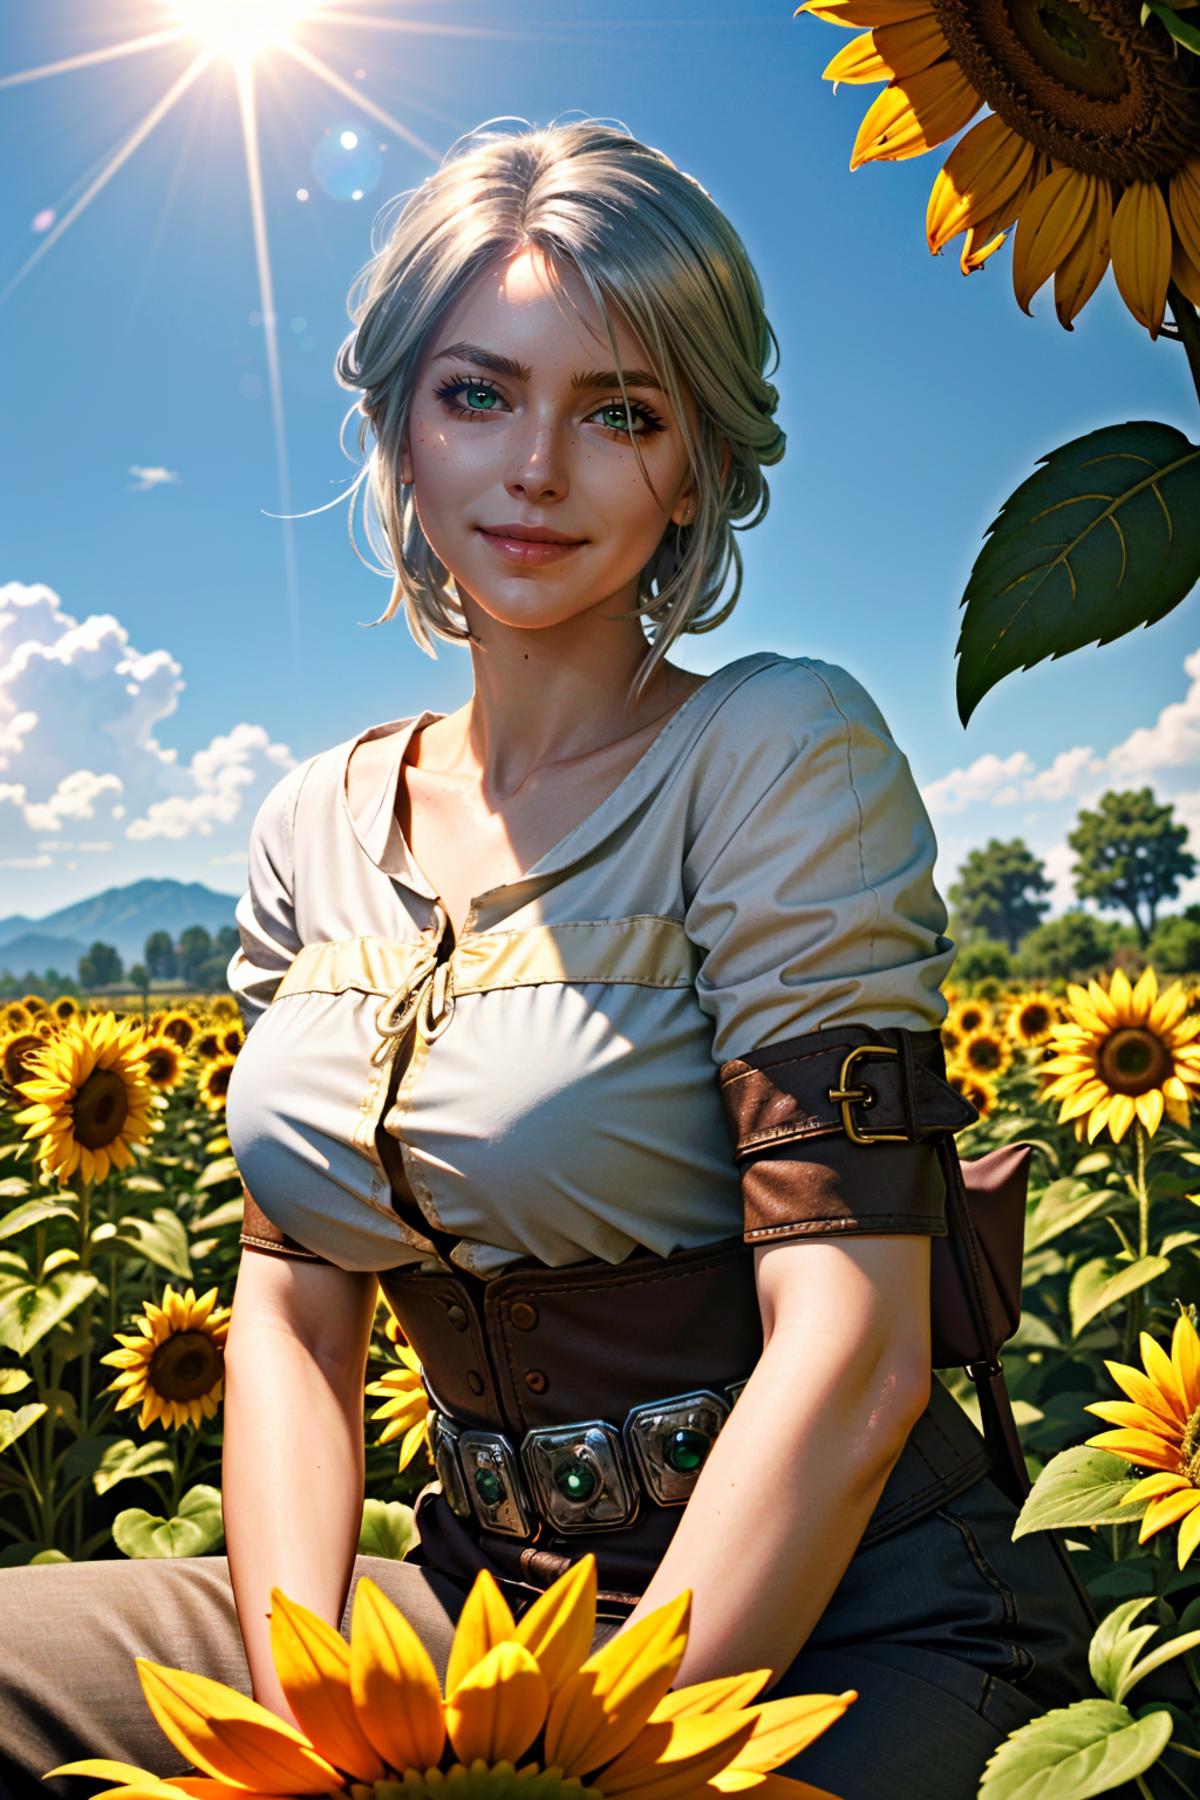 Ciri from The Witcher 3 image by BloodRedKittie